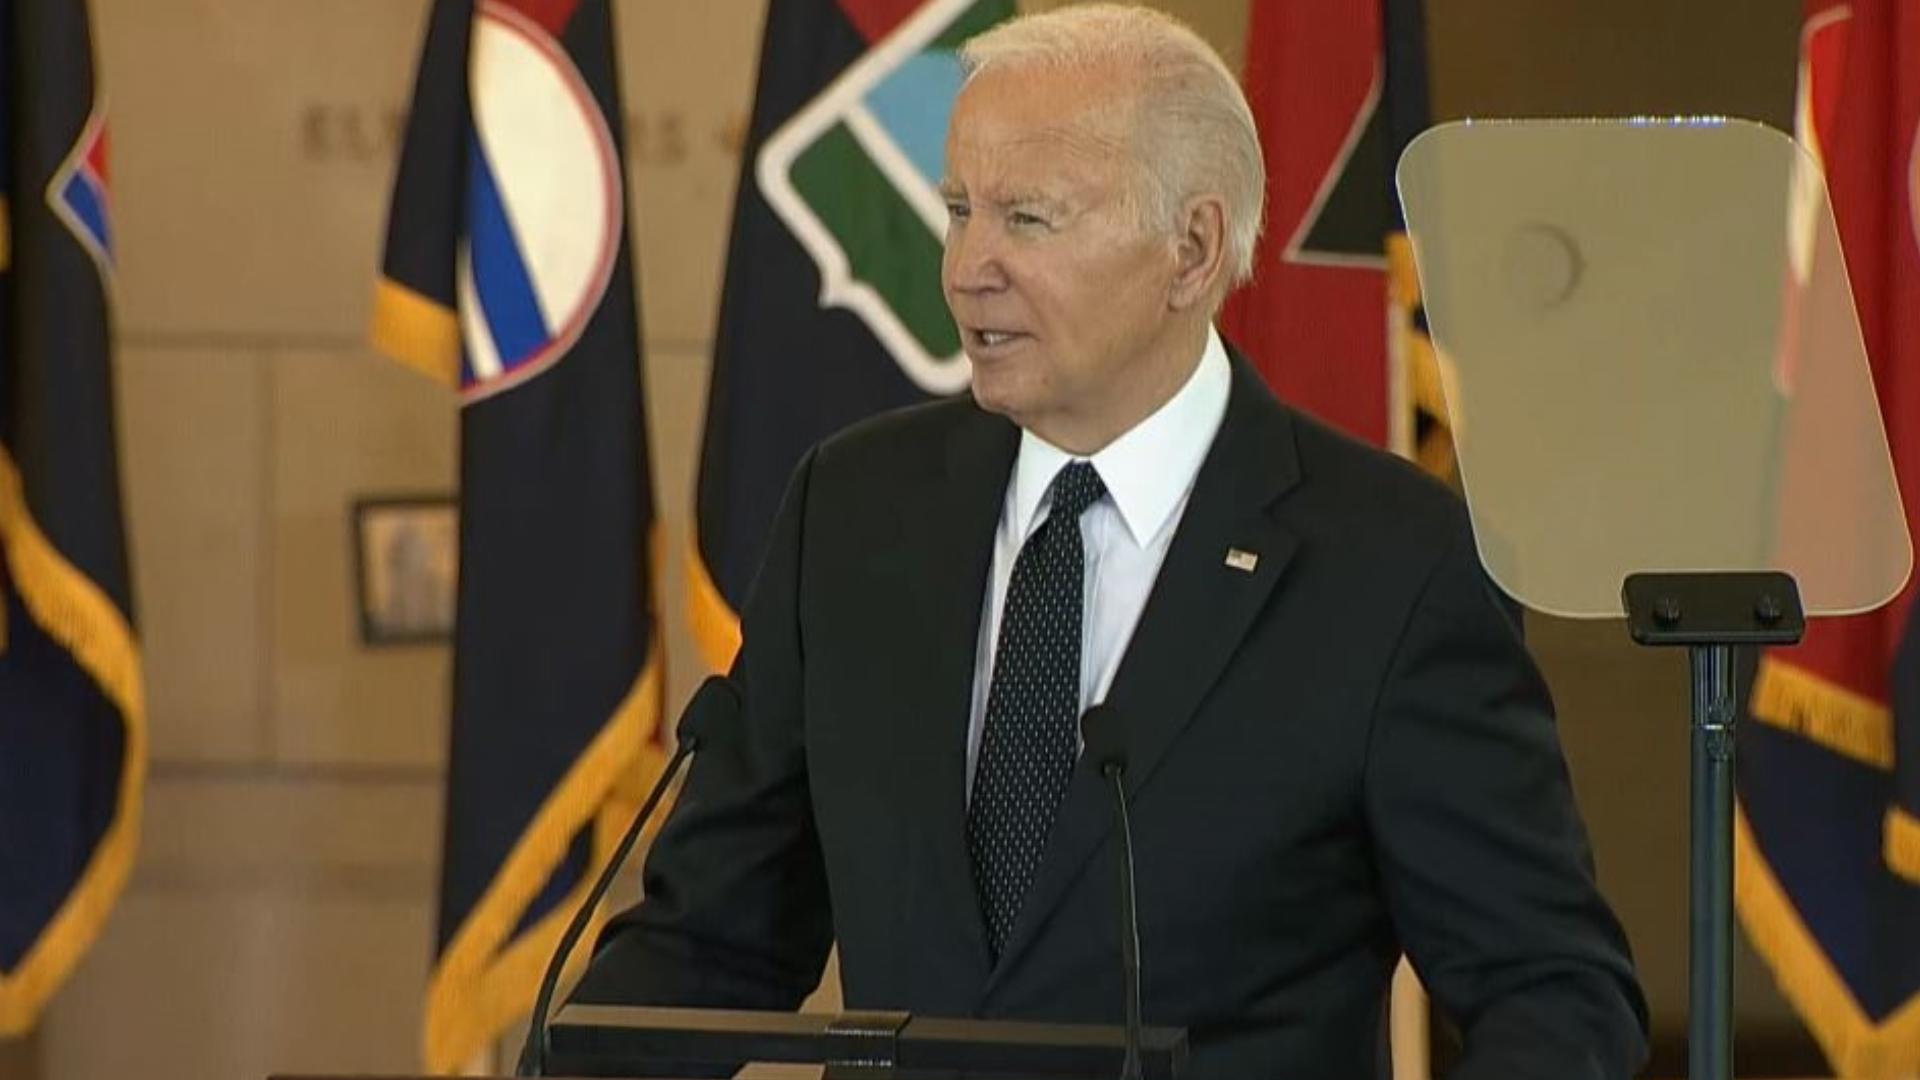 President Biden issued a forceful condemnation of antisemitism during a ceremony Tuesday to remember victims of the Holocaust.